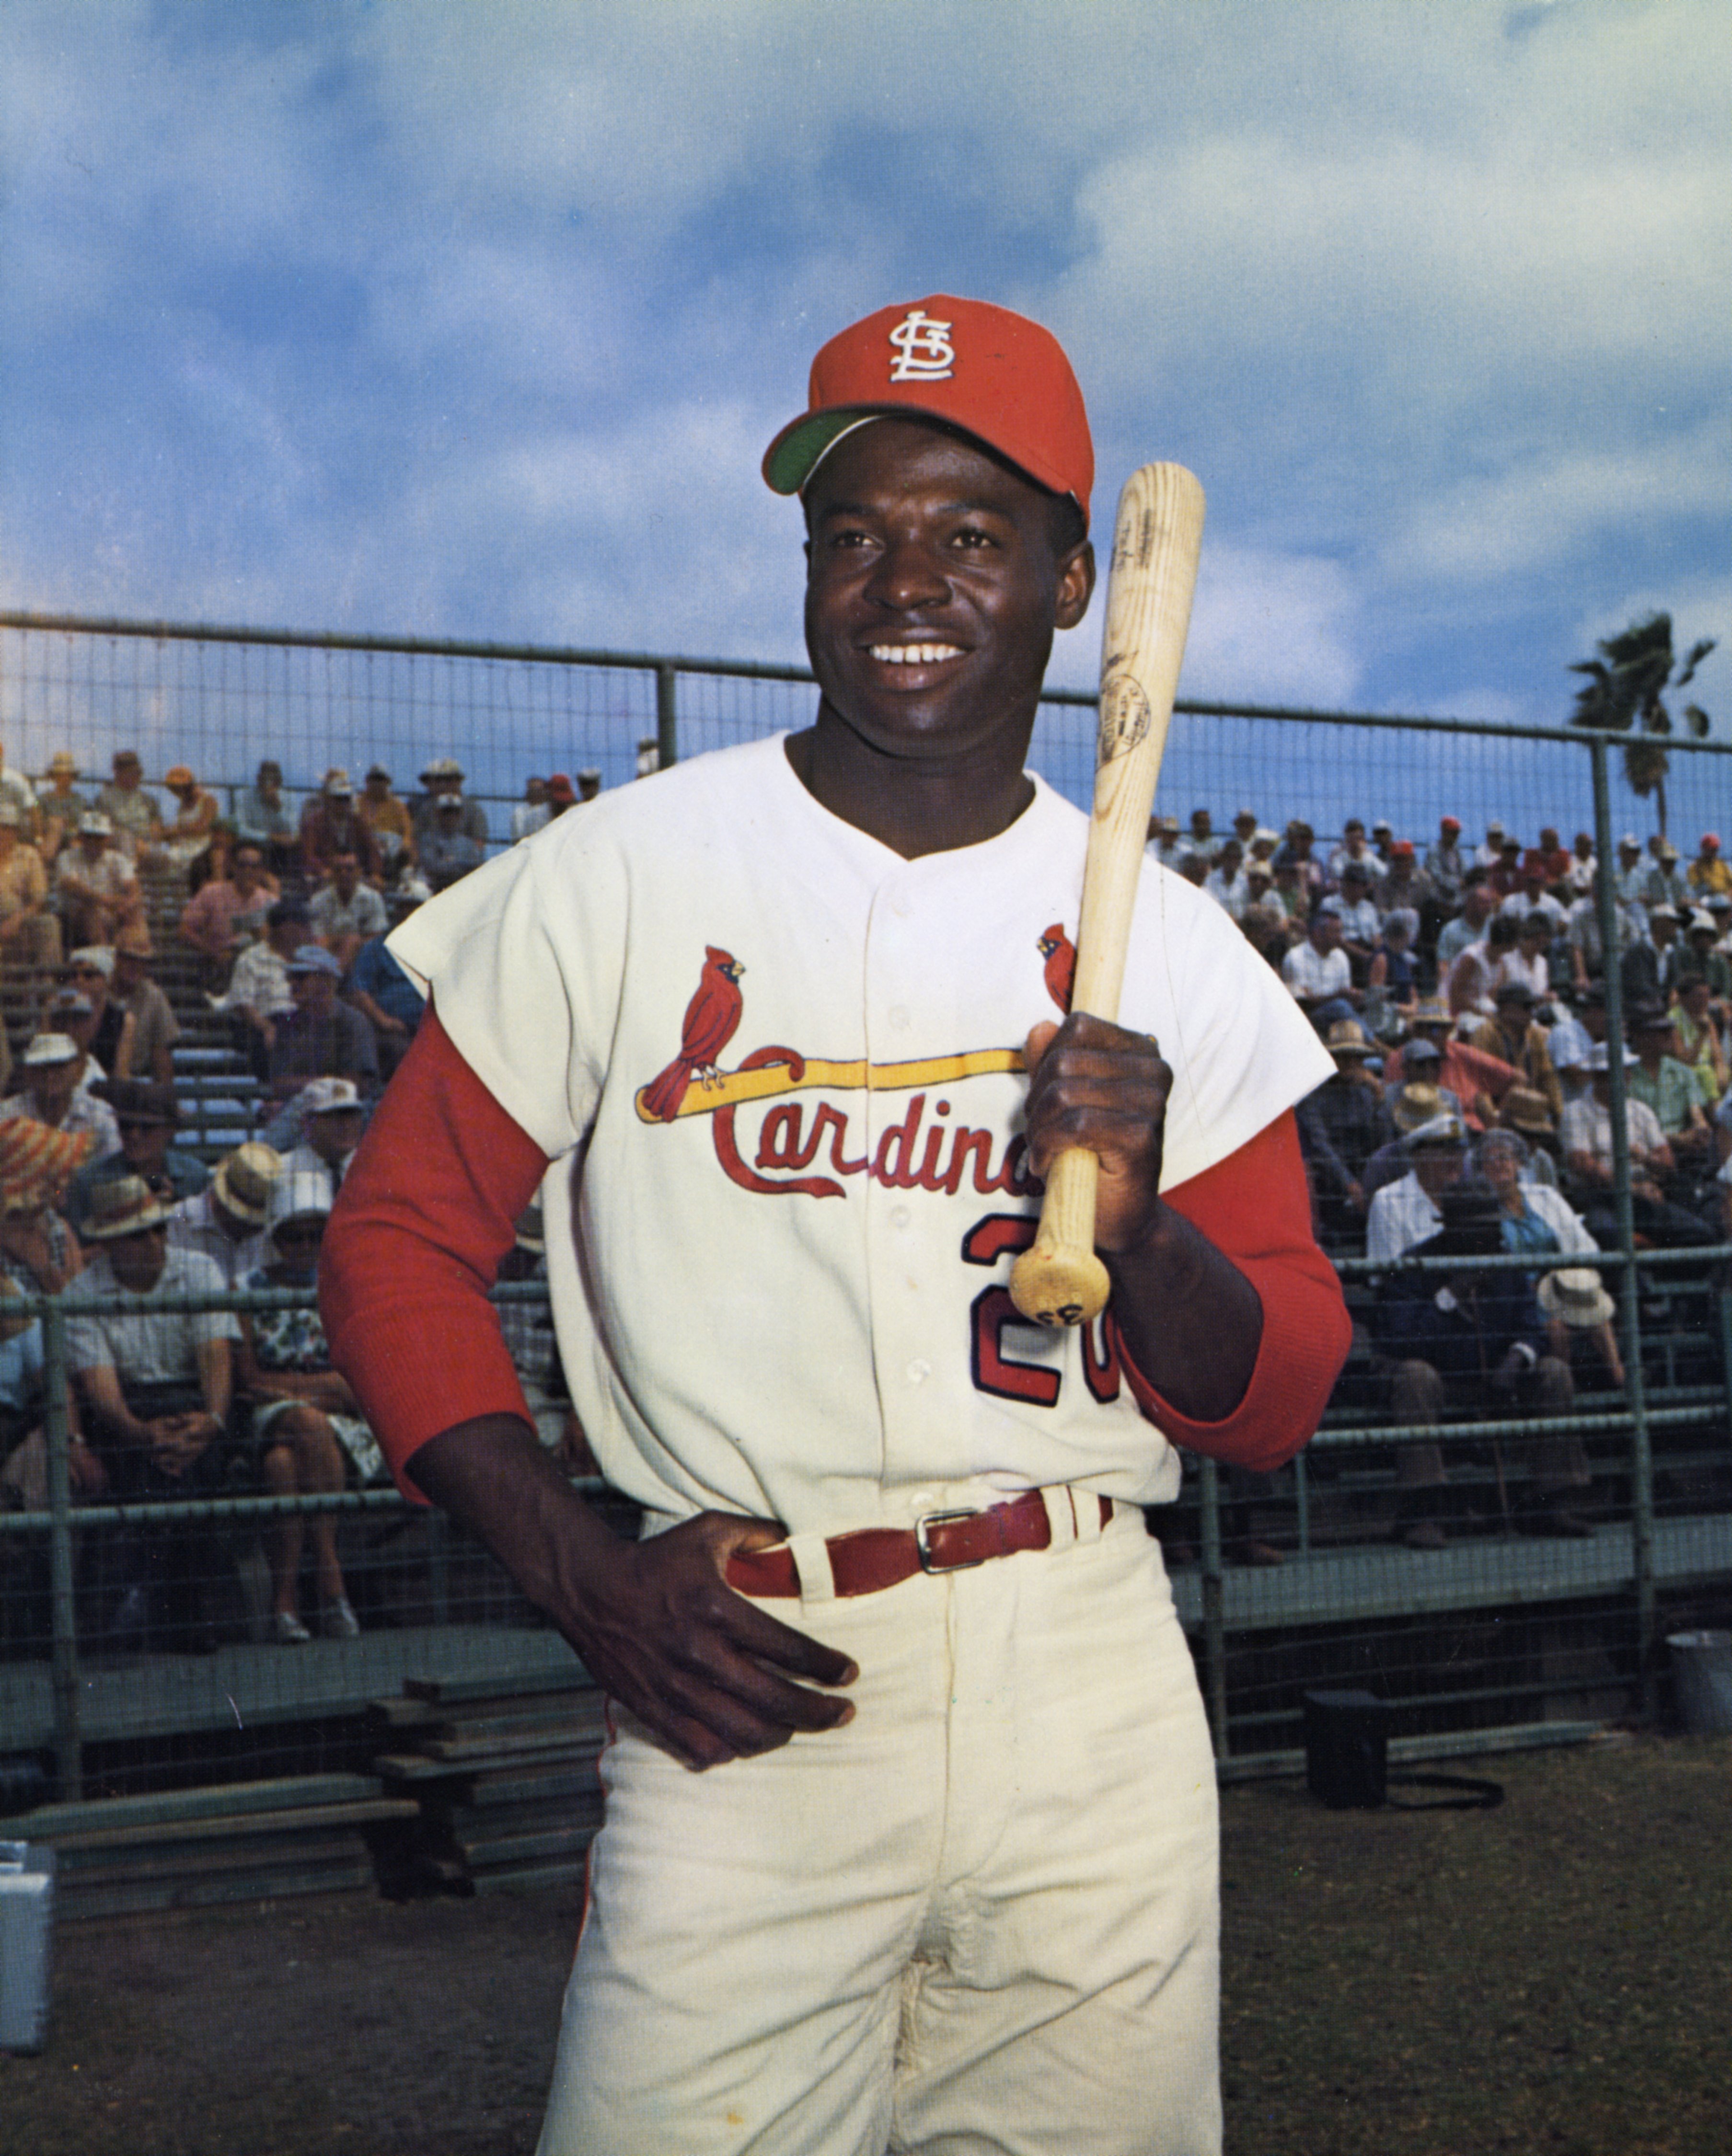 Lou Brock poses for a photograph at the St. Louis Cardinals spring training camp in March, 1965 in St. Petersburg, Florida. | Source: Getty Images